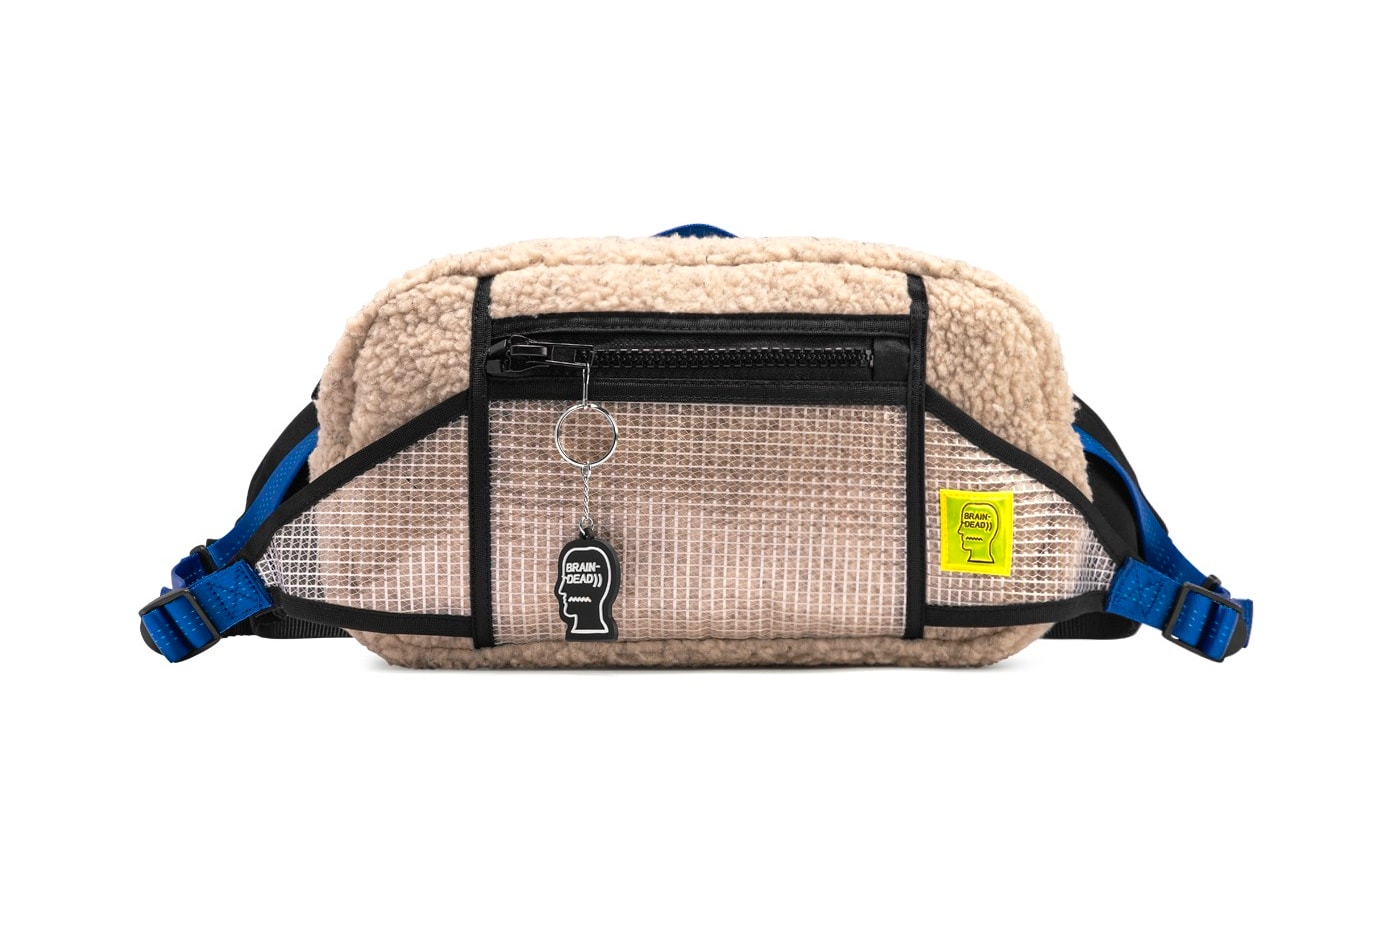 Brain Dead Sherpa Rush Hour Fanny Pack menswear streetwear spring summer 2020 collection bum bags carrying solutions accessories kyle ng eric elm graphics slings shoulder messenger satchel